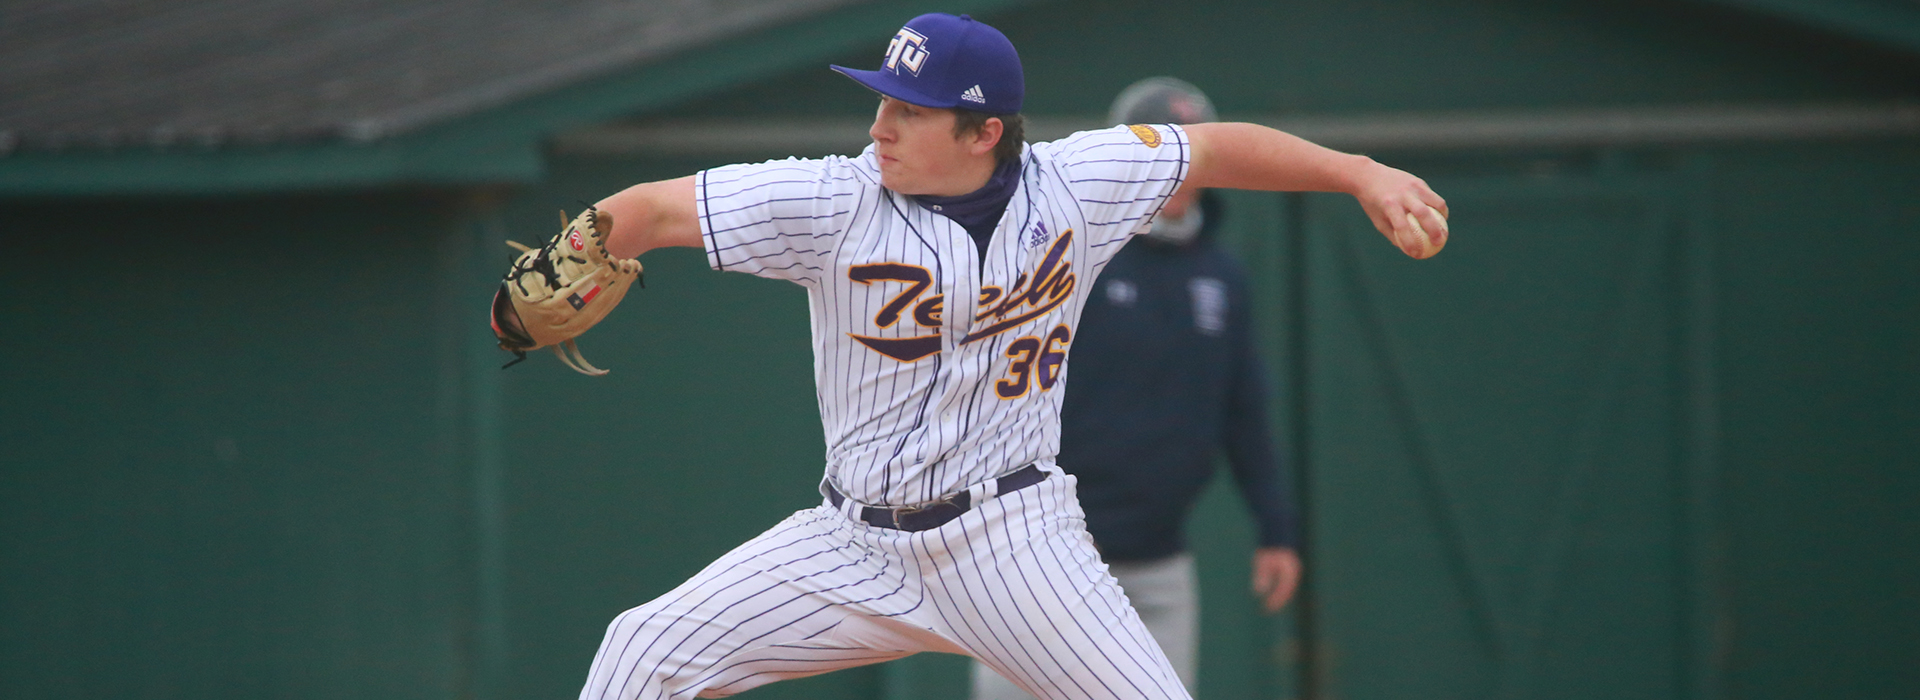 Golden Eagles fall in doubleheader action at Jacksonville State